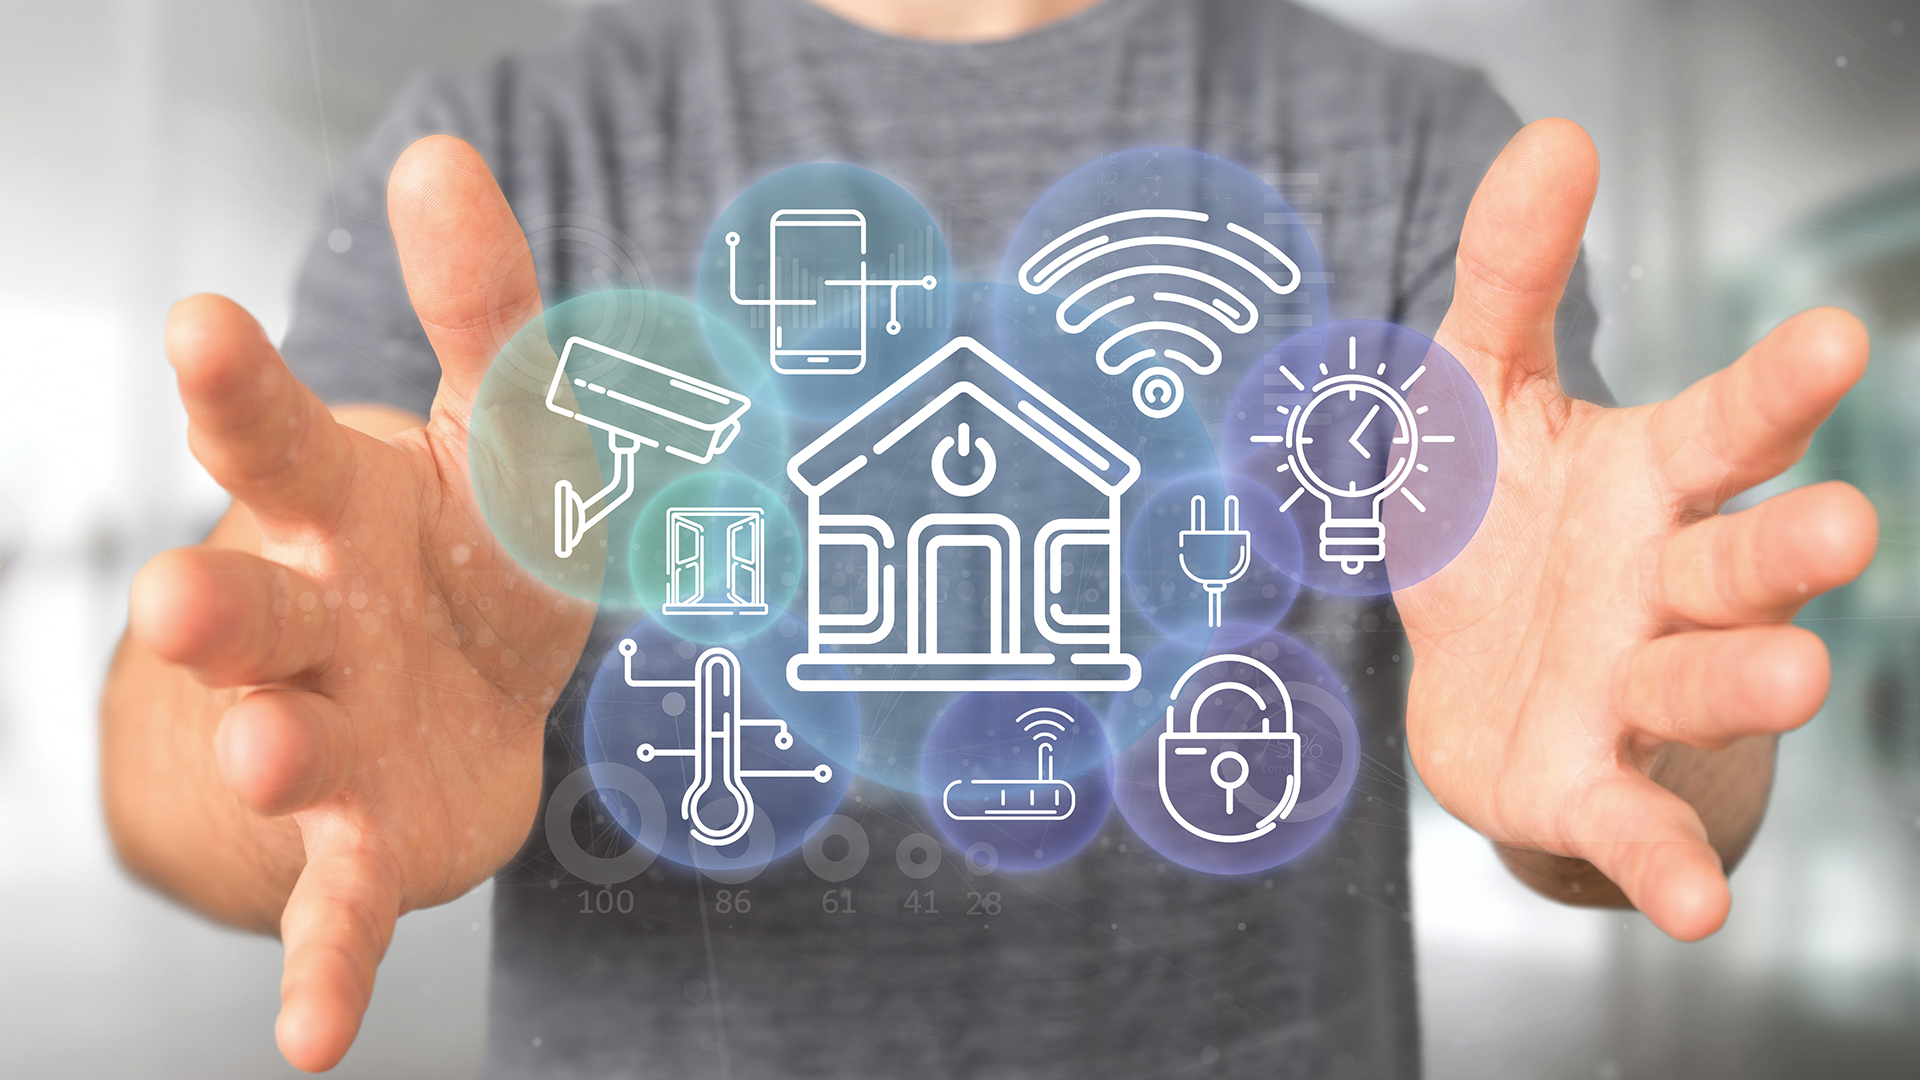 Having a Smart Home: Talk to your devices